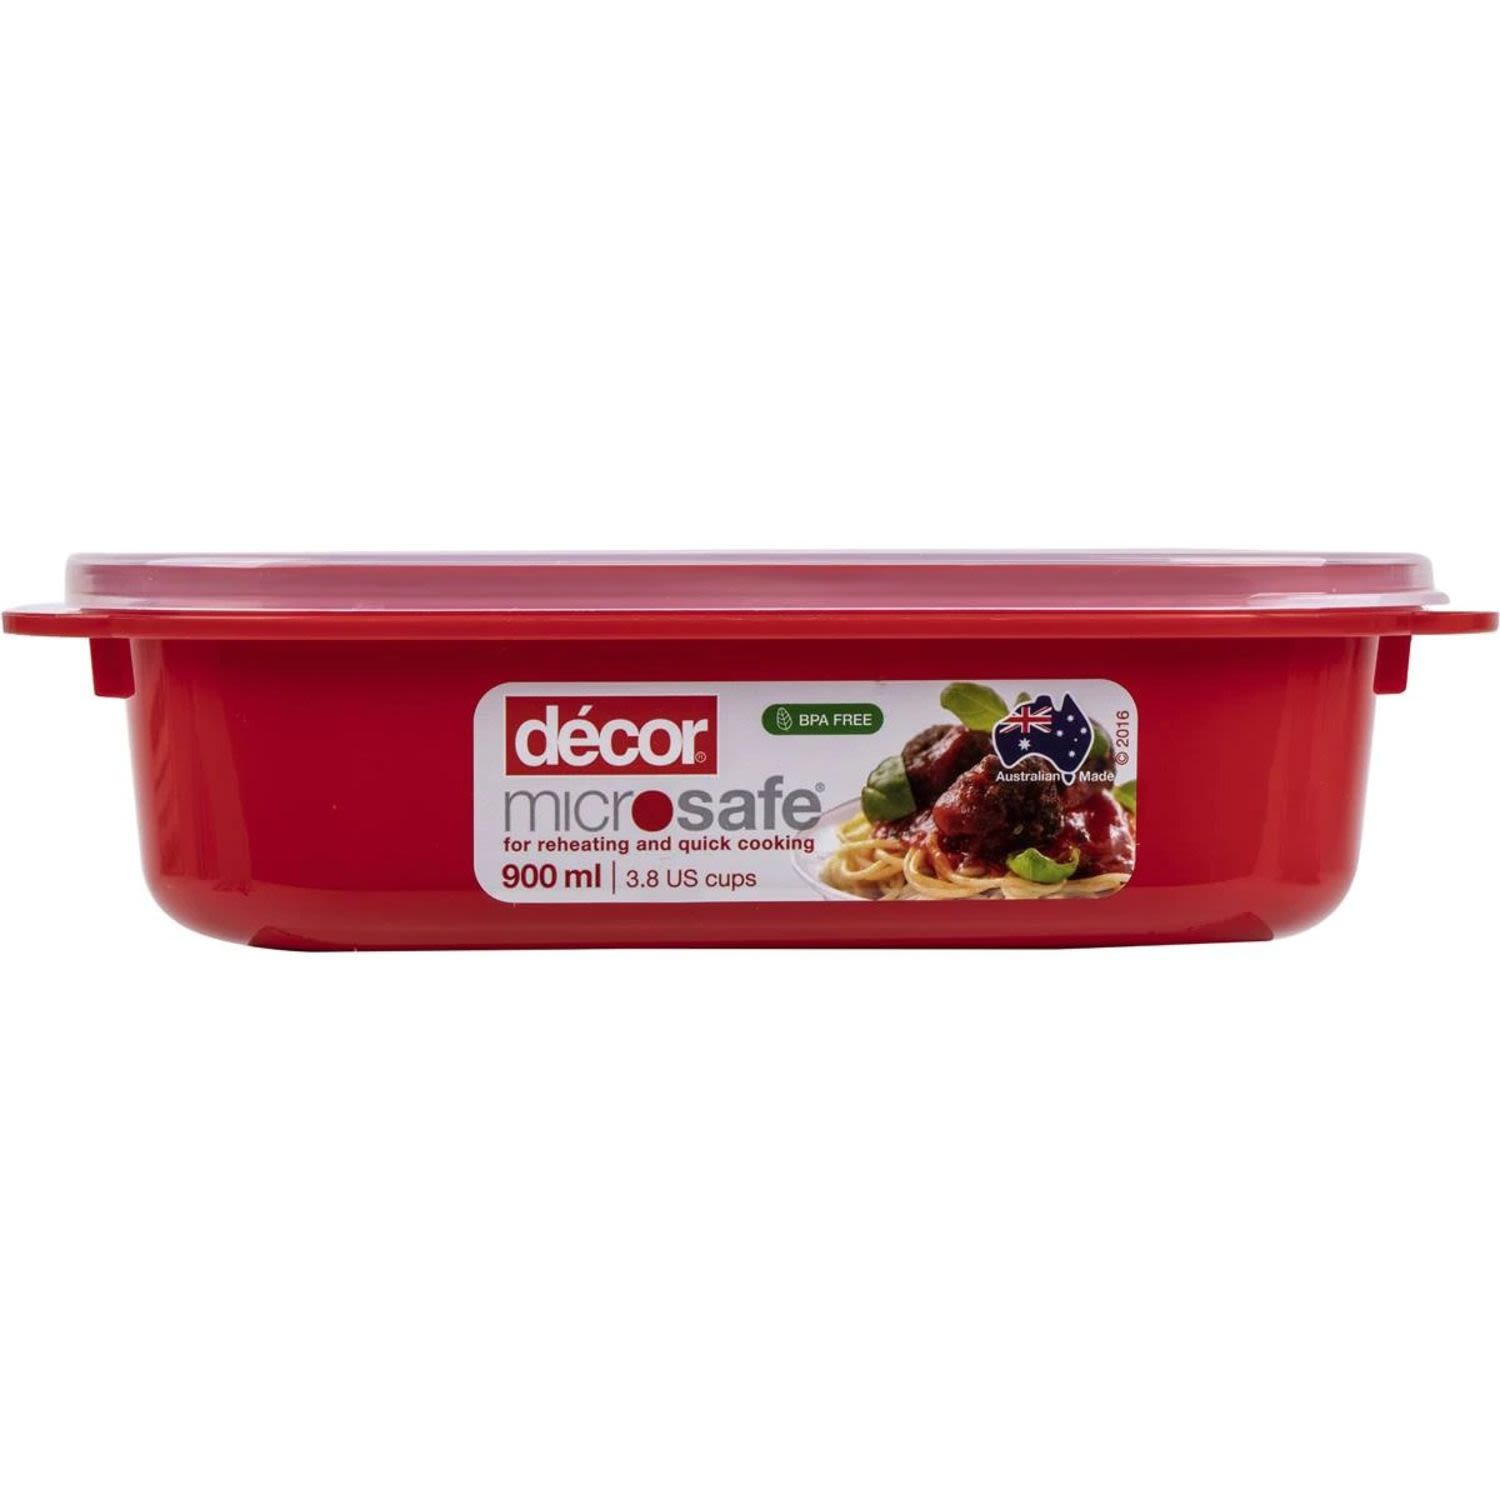 Decor Microsafe Container Oblong, 1 Each